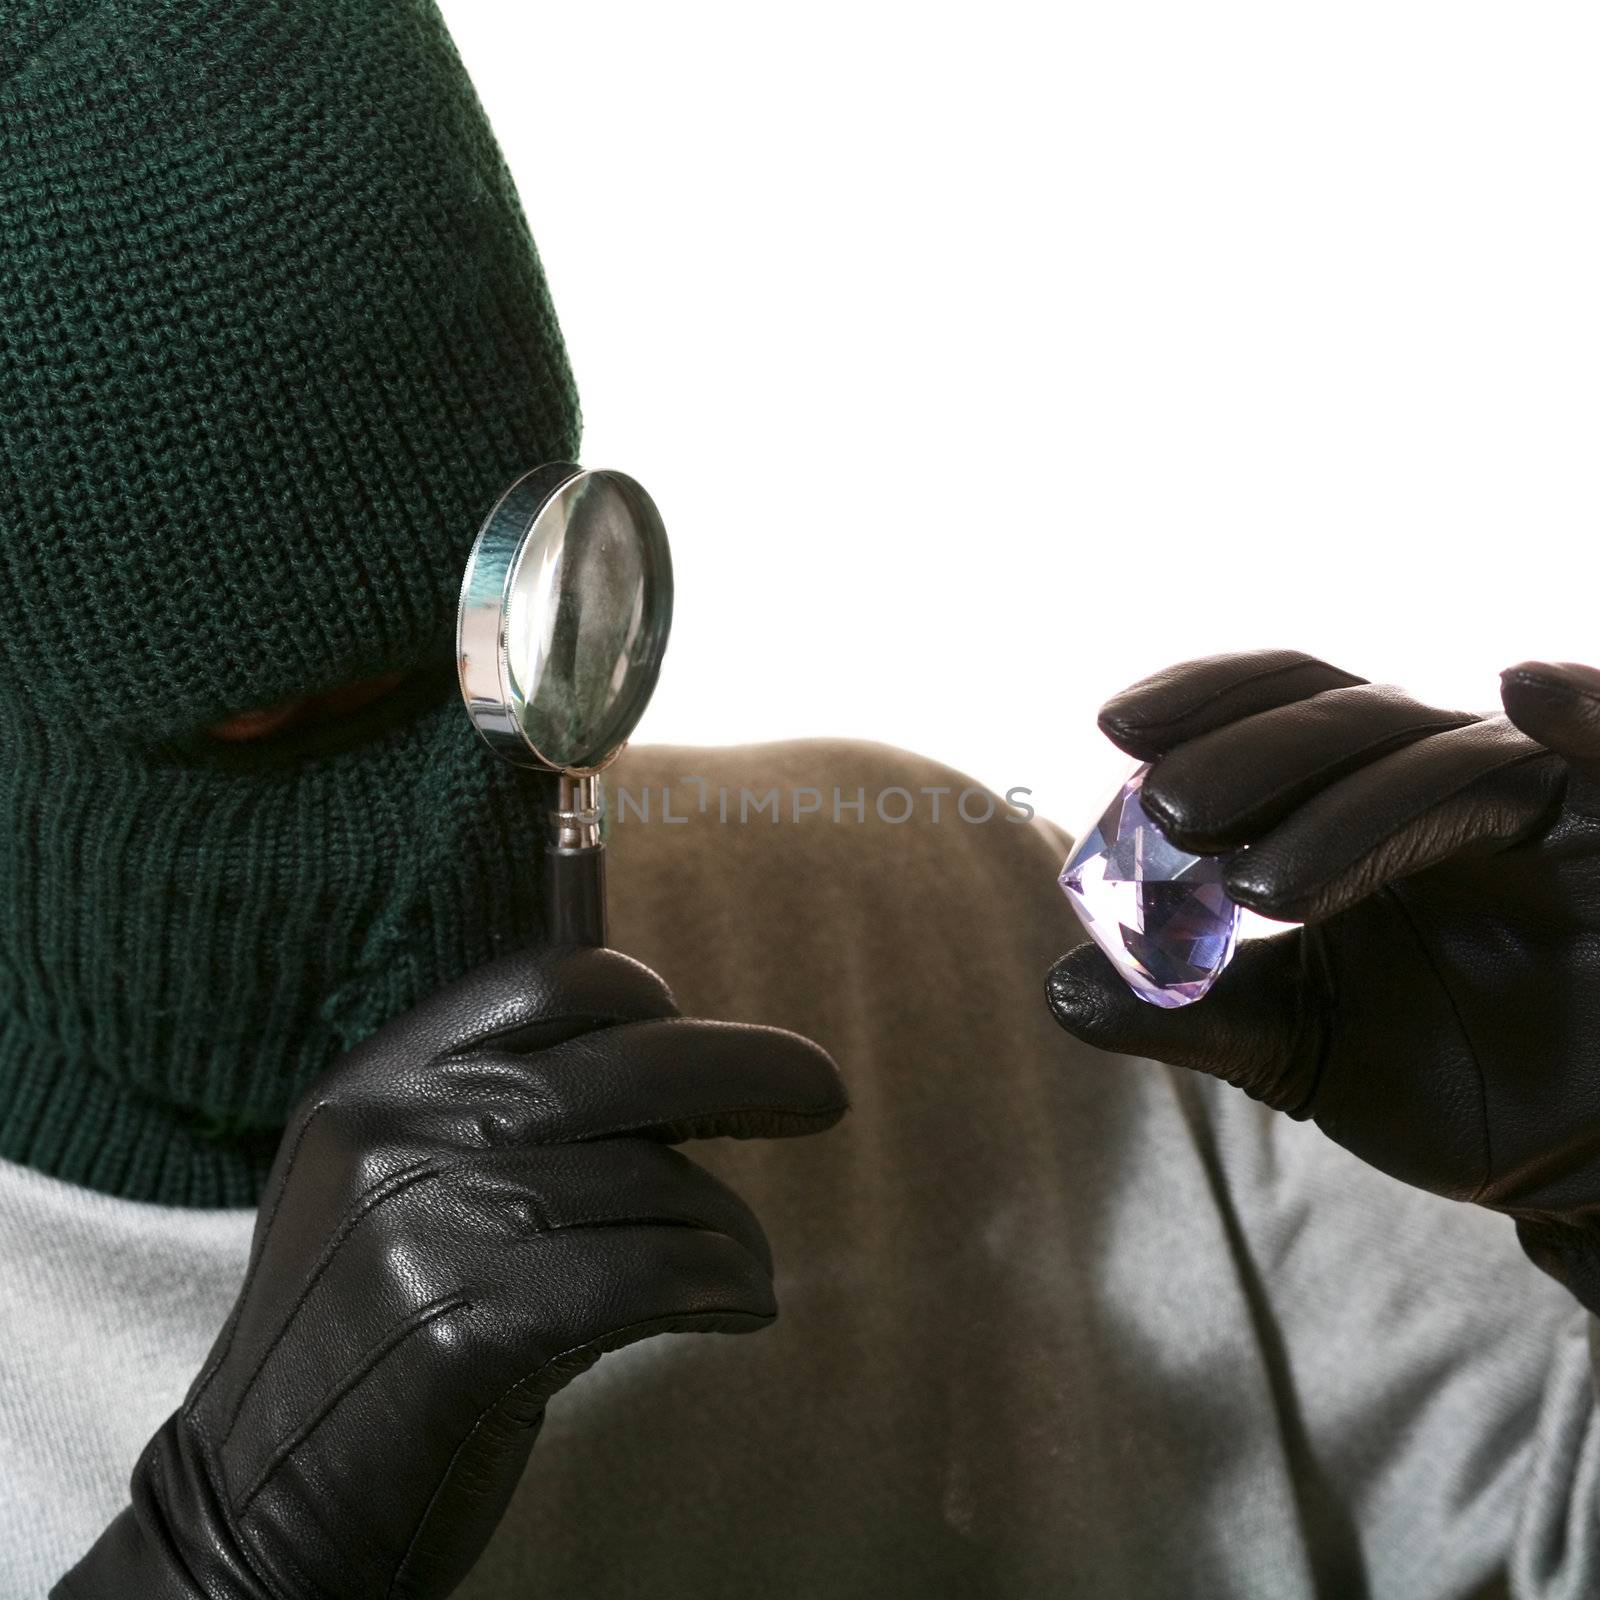 An image of a man in mask with a magnifier and jewel